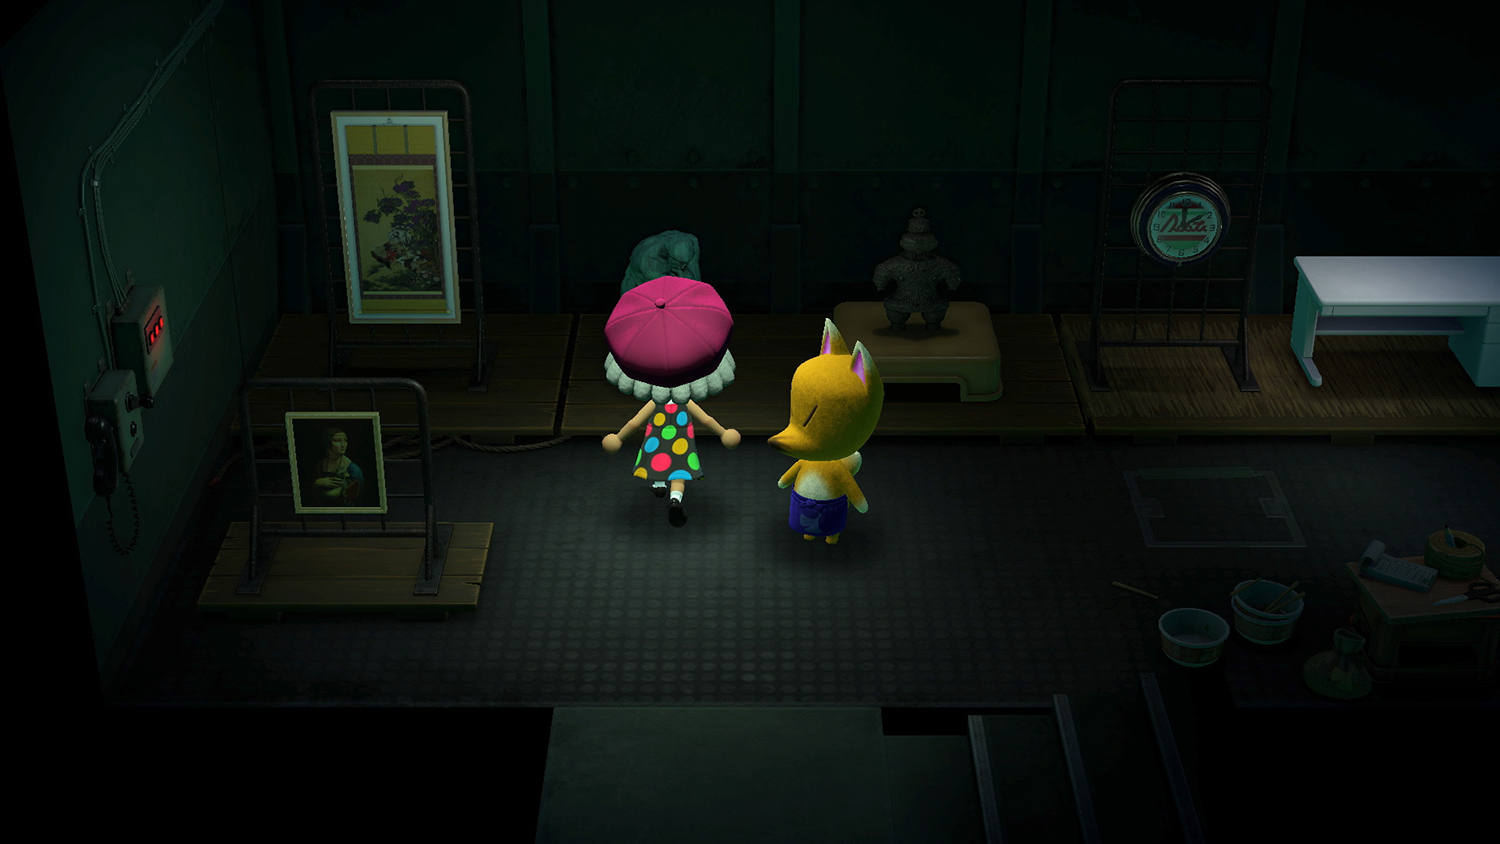 Animal Crossing: New Horizons player visits Redd's boat to look at paintings and statues